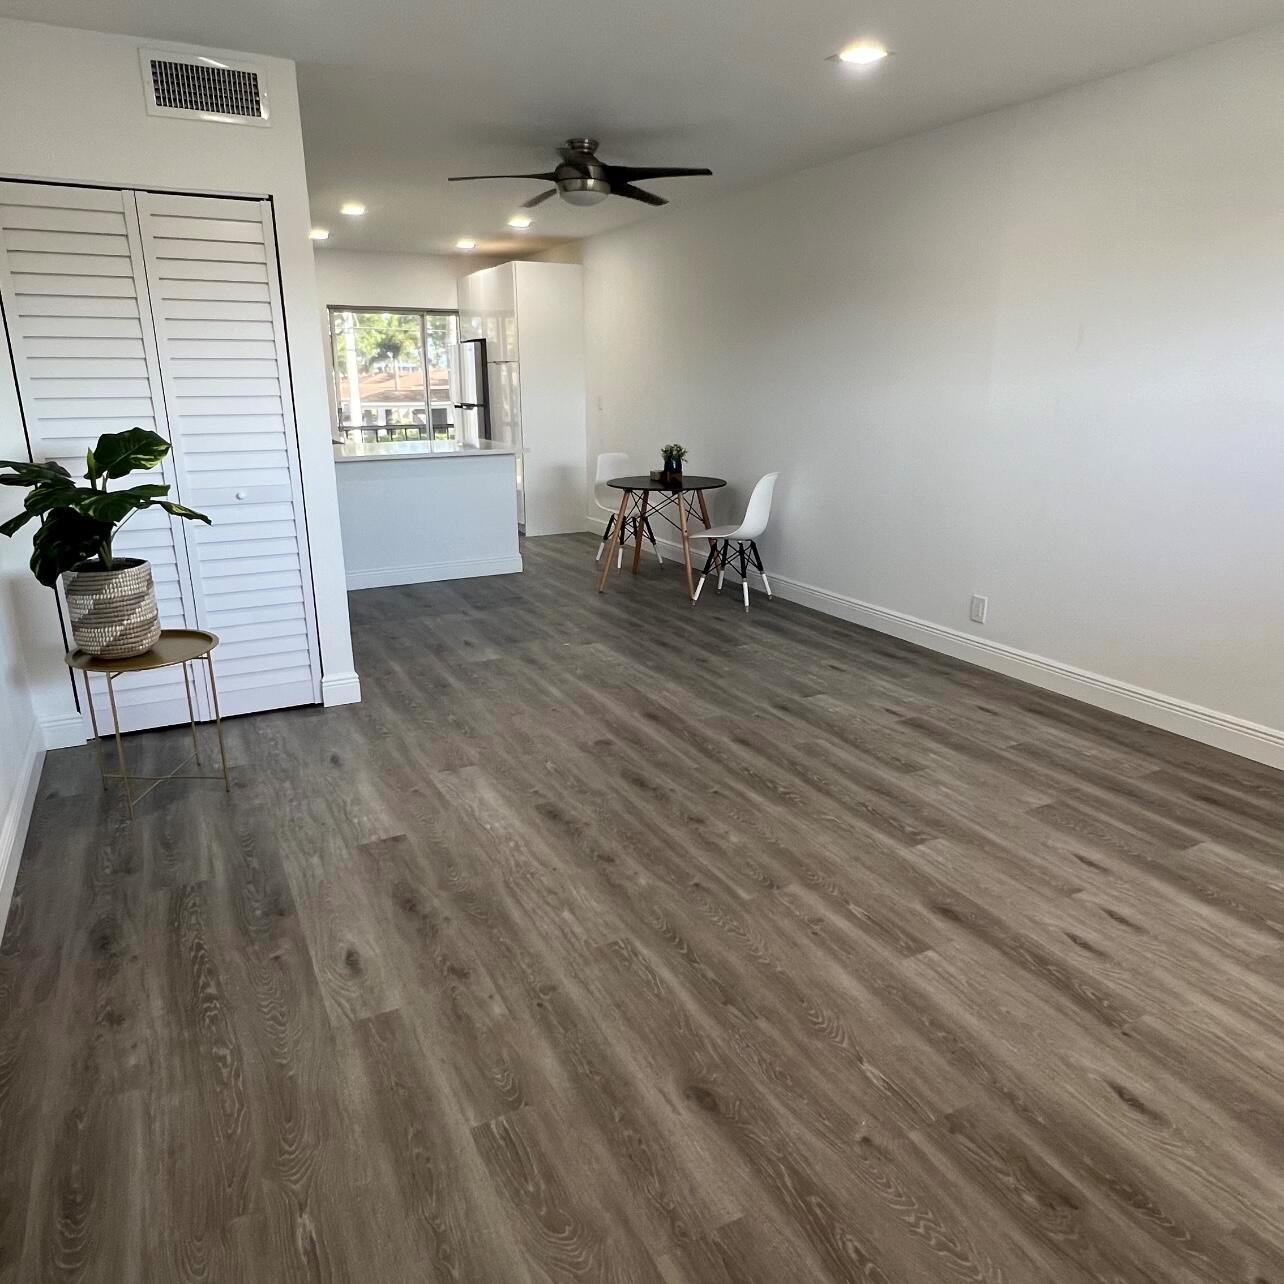 **Totally renovated**This 1 bed 1.5 bath condo has it all!Less than 10 min to Atlantic Avenue, Close to Beach, shopping and dining. The community has a ton of amenities, including a clubhouse, 2 pools, a fitness center, billiards, a community room, and a theater,At least one person must be 55+. Don't miss out on this opportunity to own a Turnkey Condo for a great price.